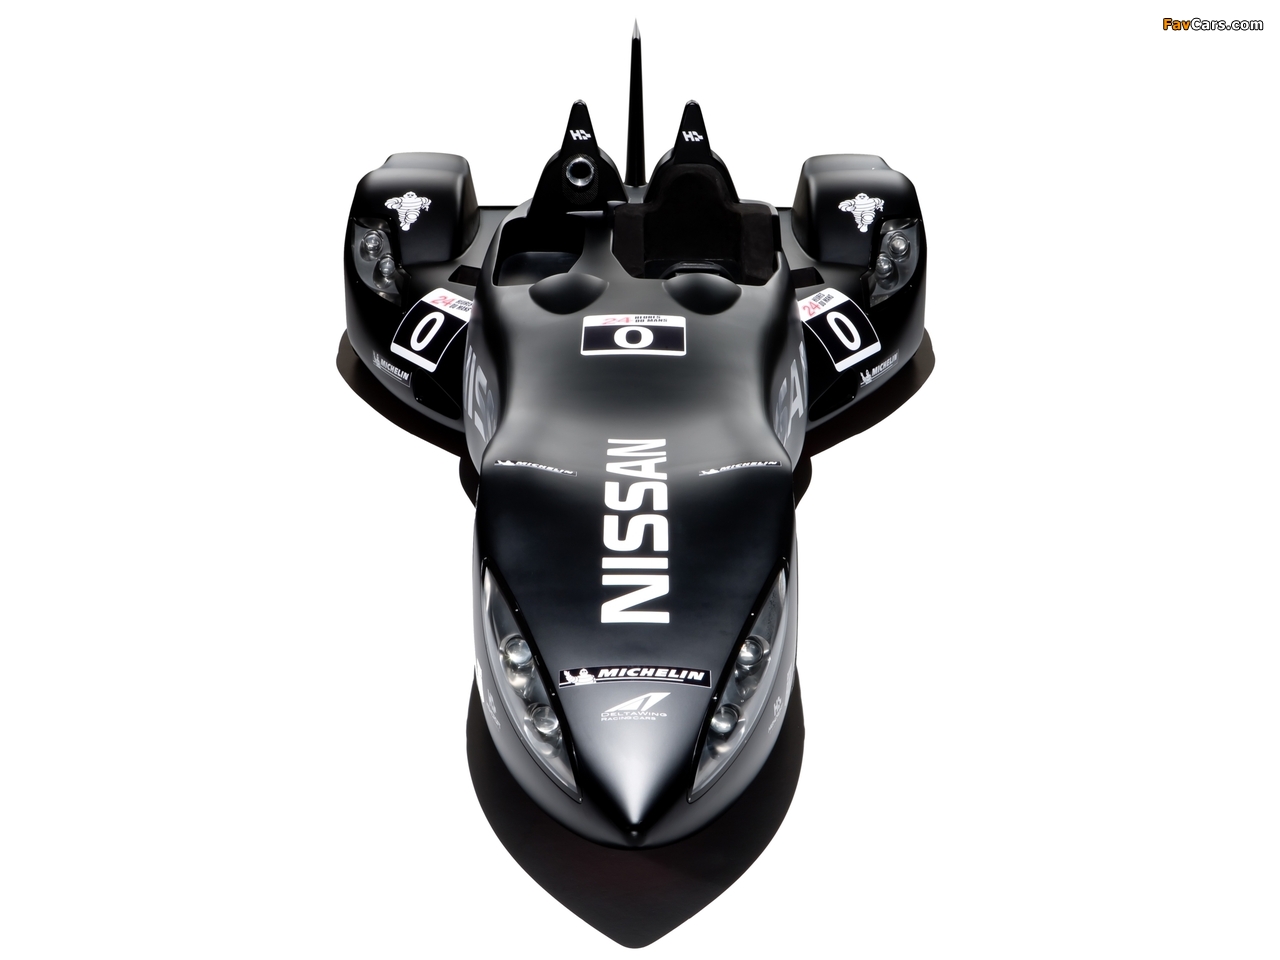 Nissan DeltaWing Experimental Race Car 2012 wallpapers (1280 x 960)